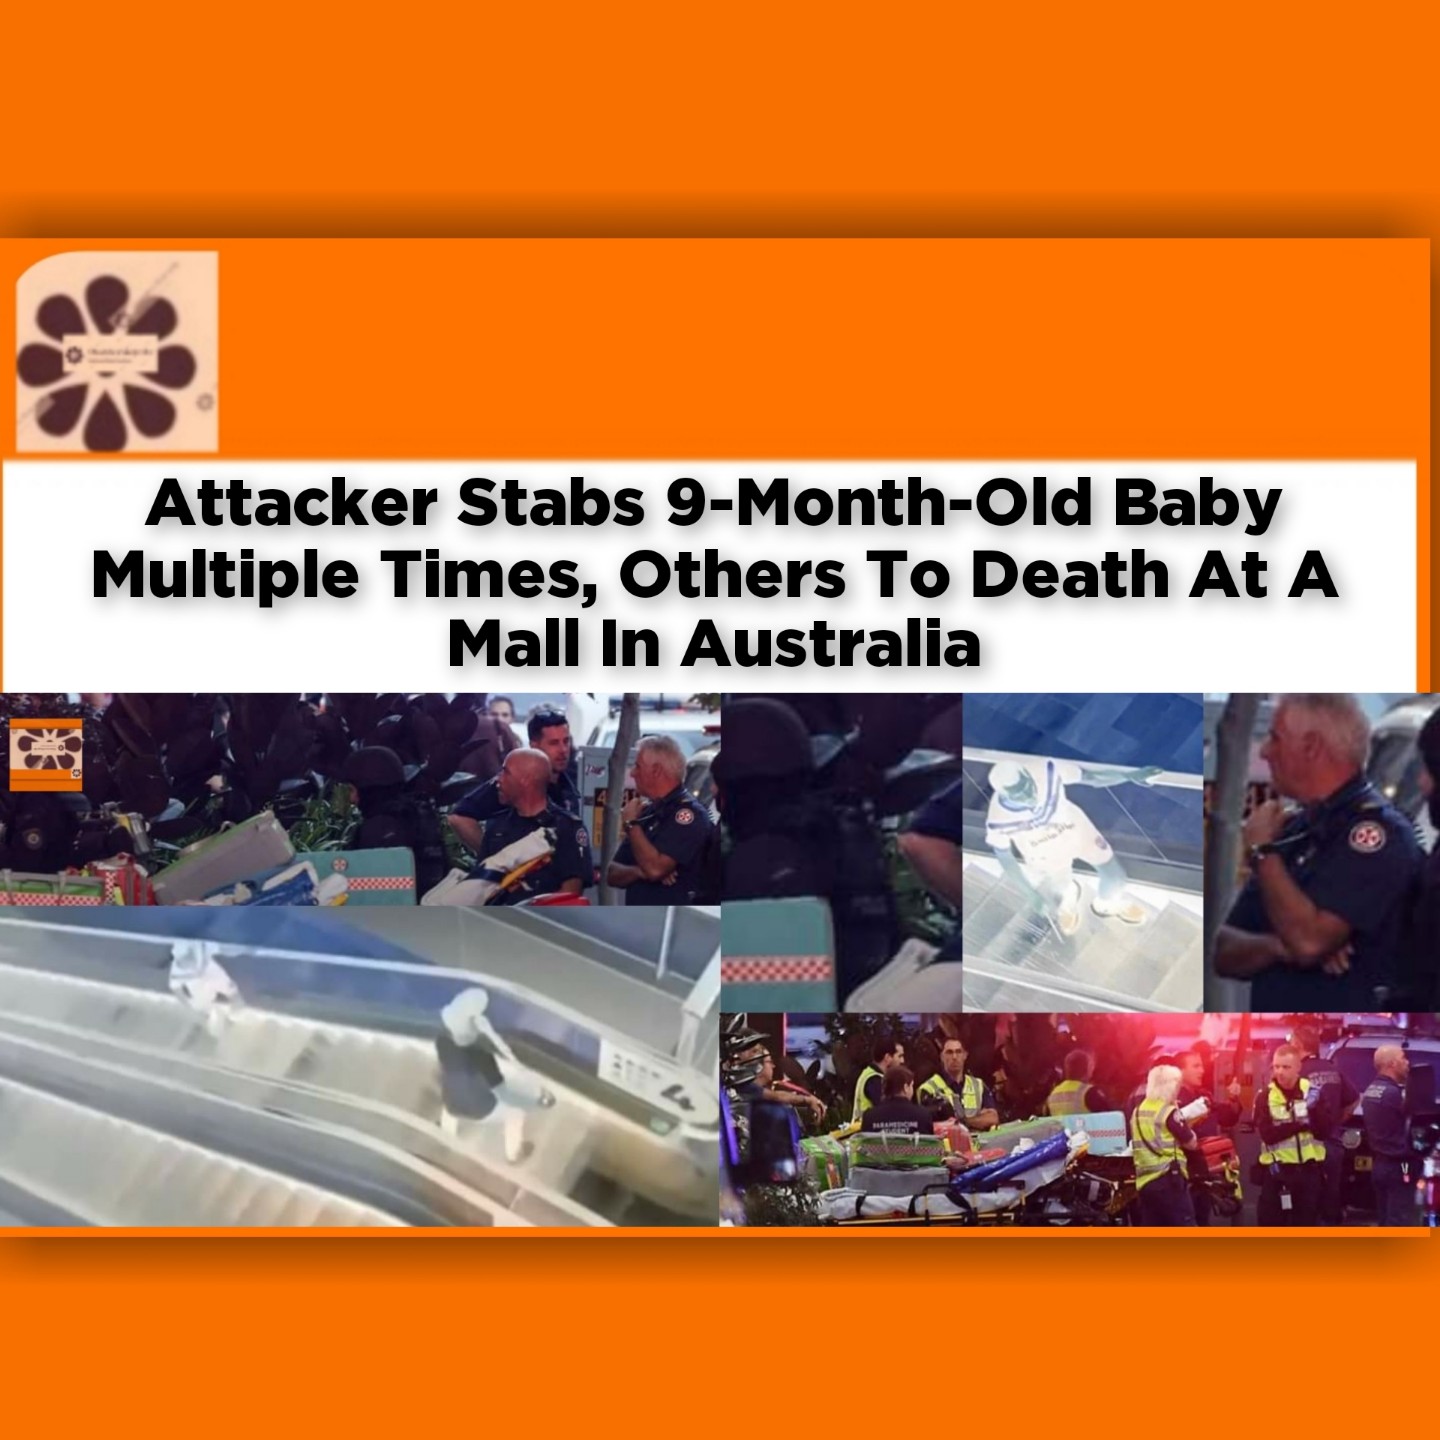 Attacker Stabs 9-Month-Old Baby Multiple Times, Others To Death At A Mall In Australia ~ OsazuwaAkonedo #Church